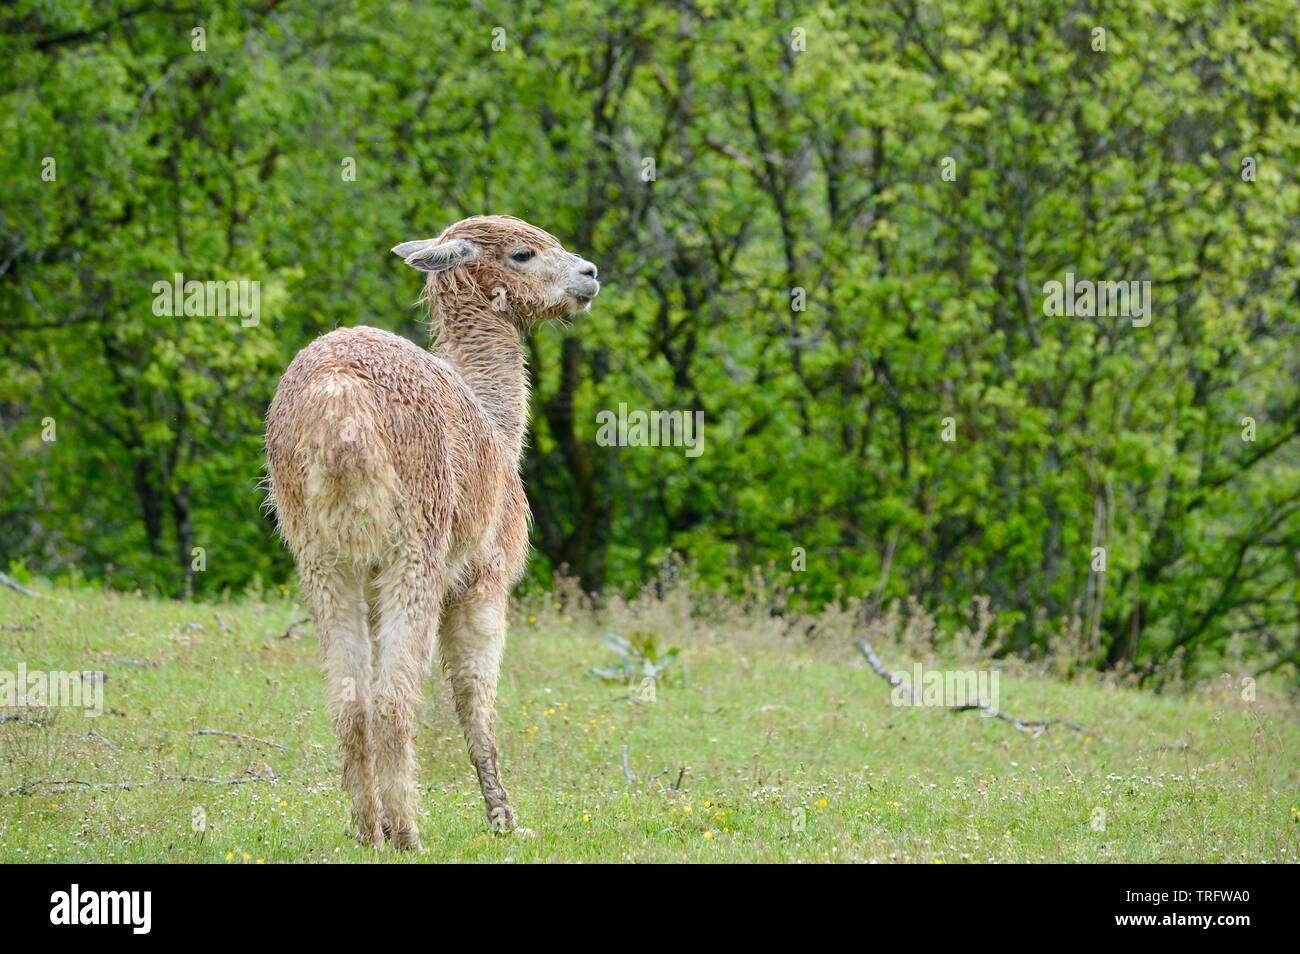 totally wet light brown alpaca standing in the pouring rain waiting for better weather Stock Photo